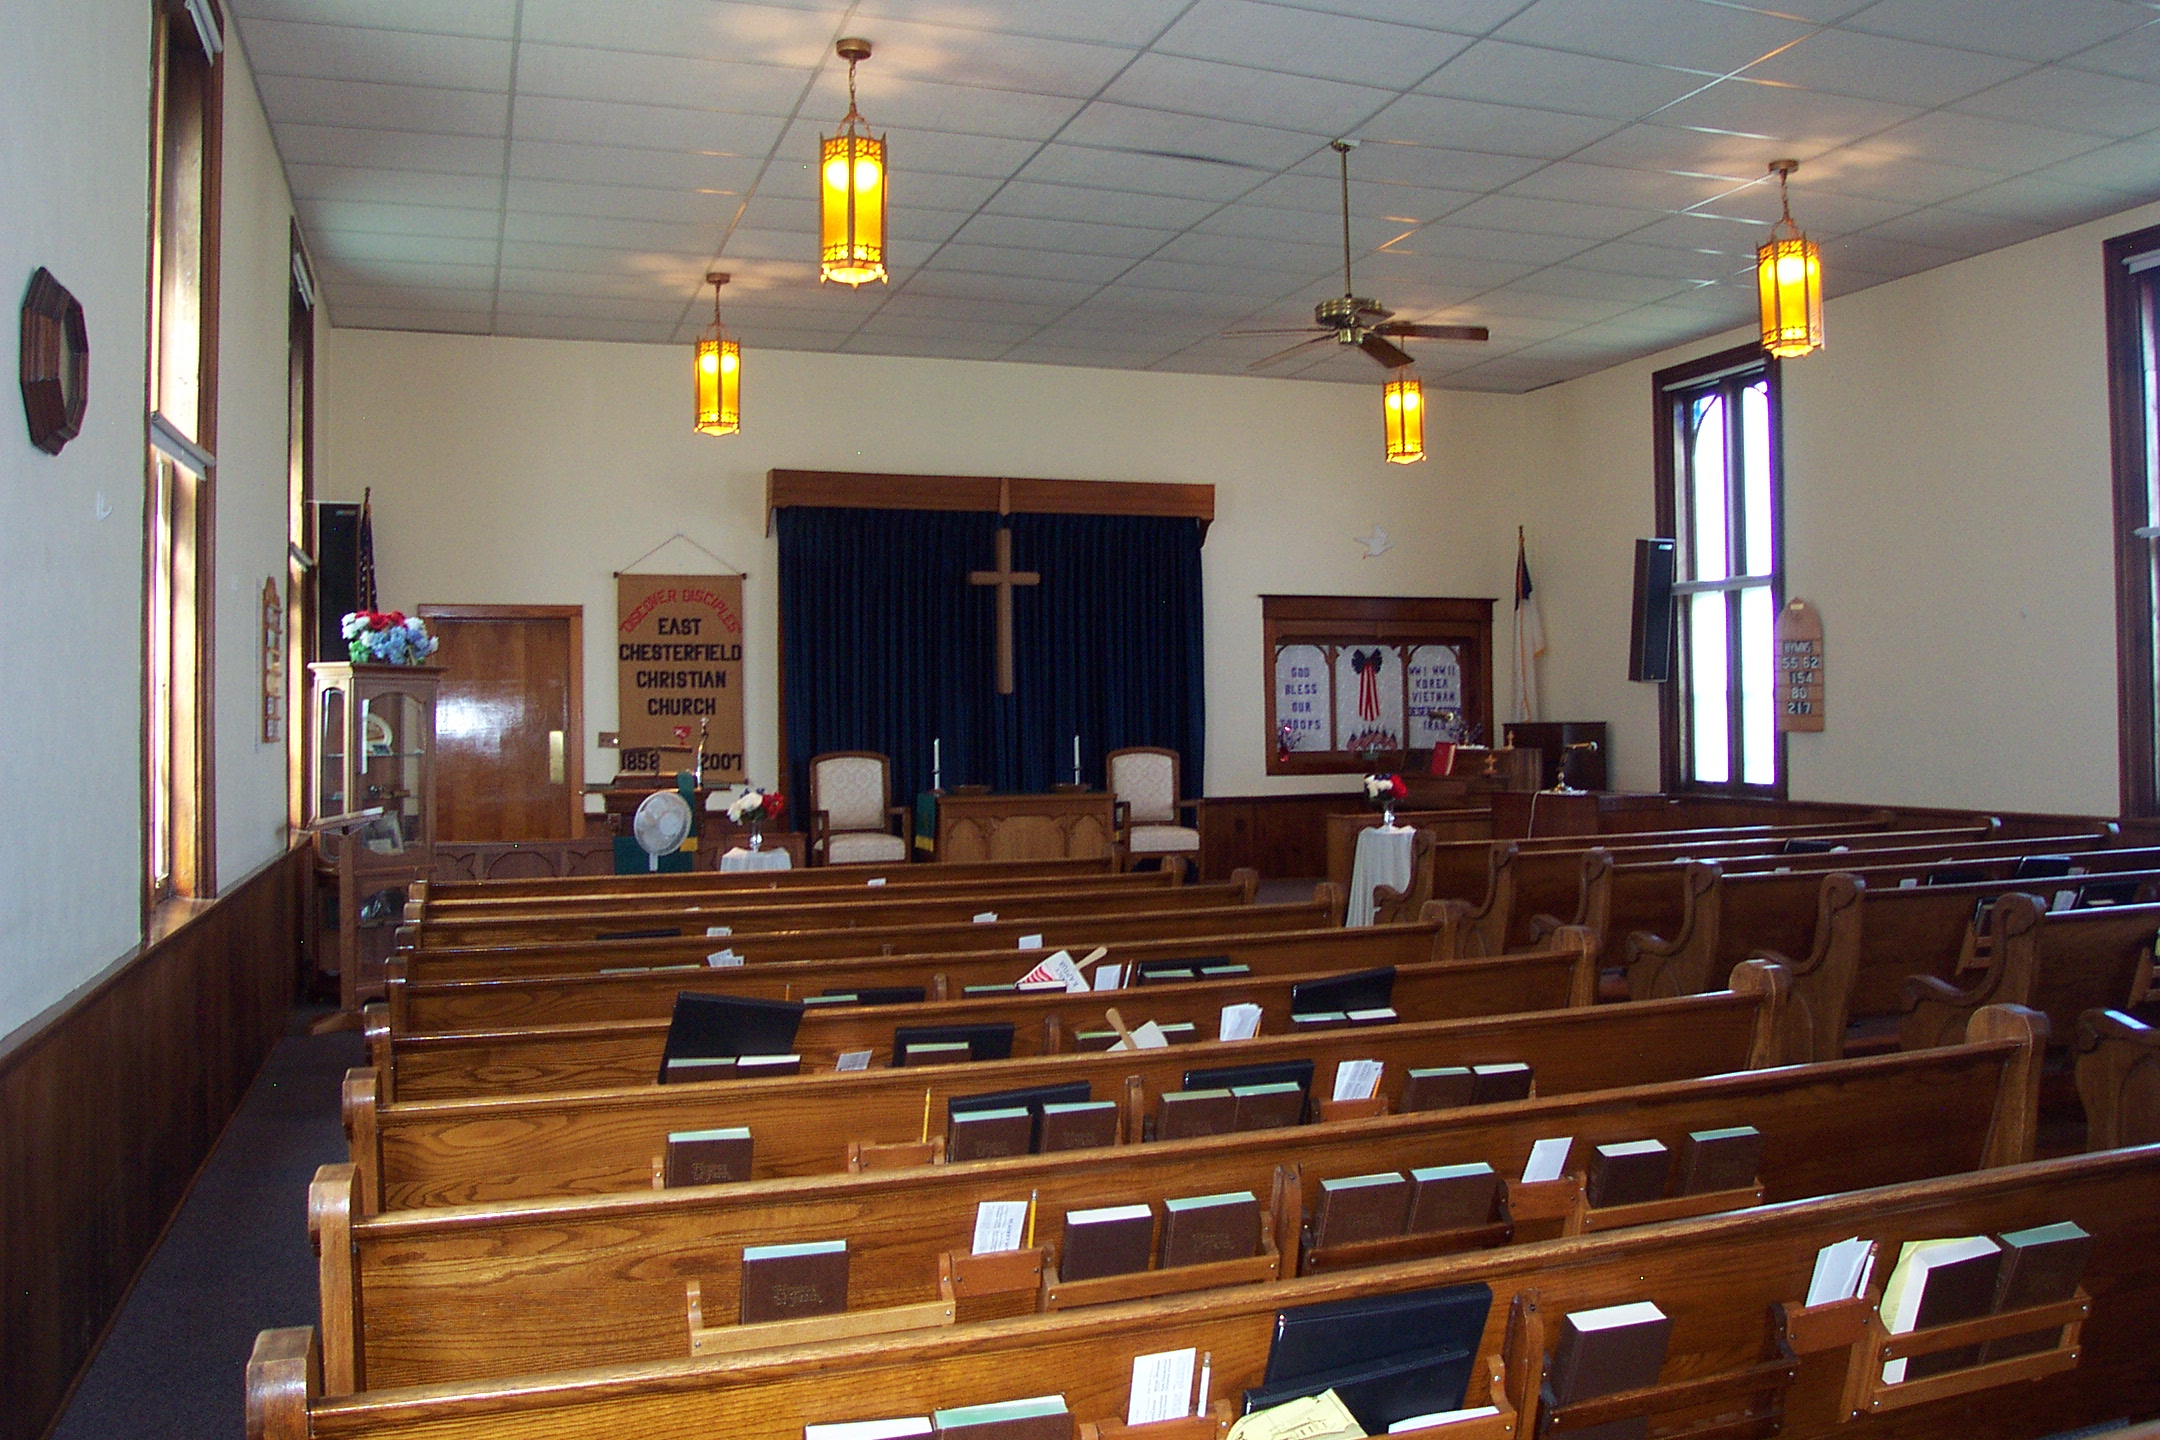 East Chesterfield interior